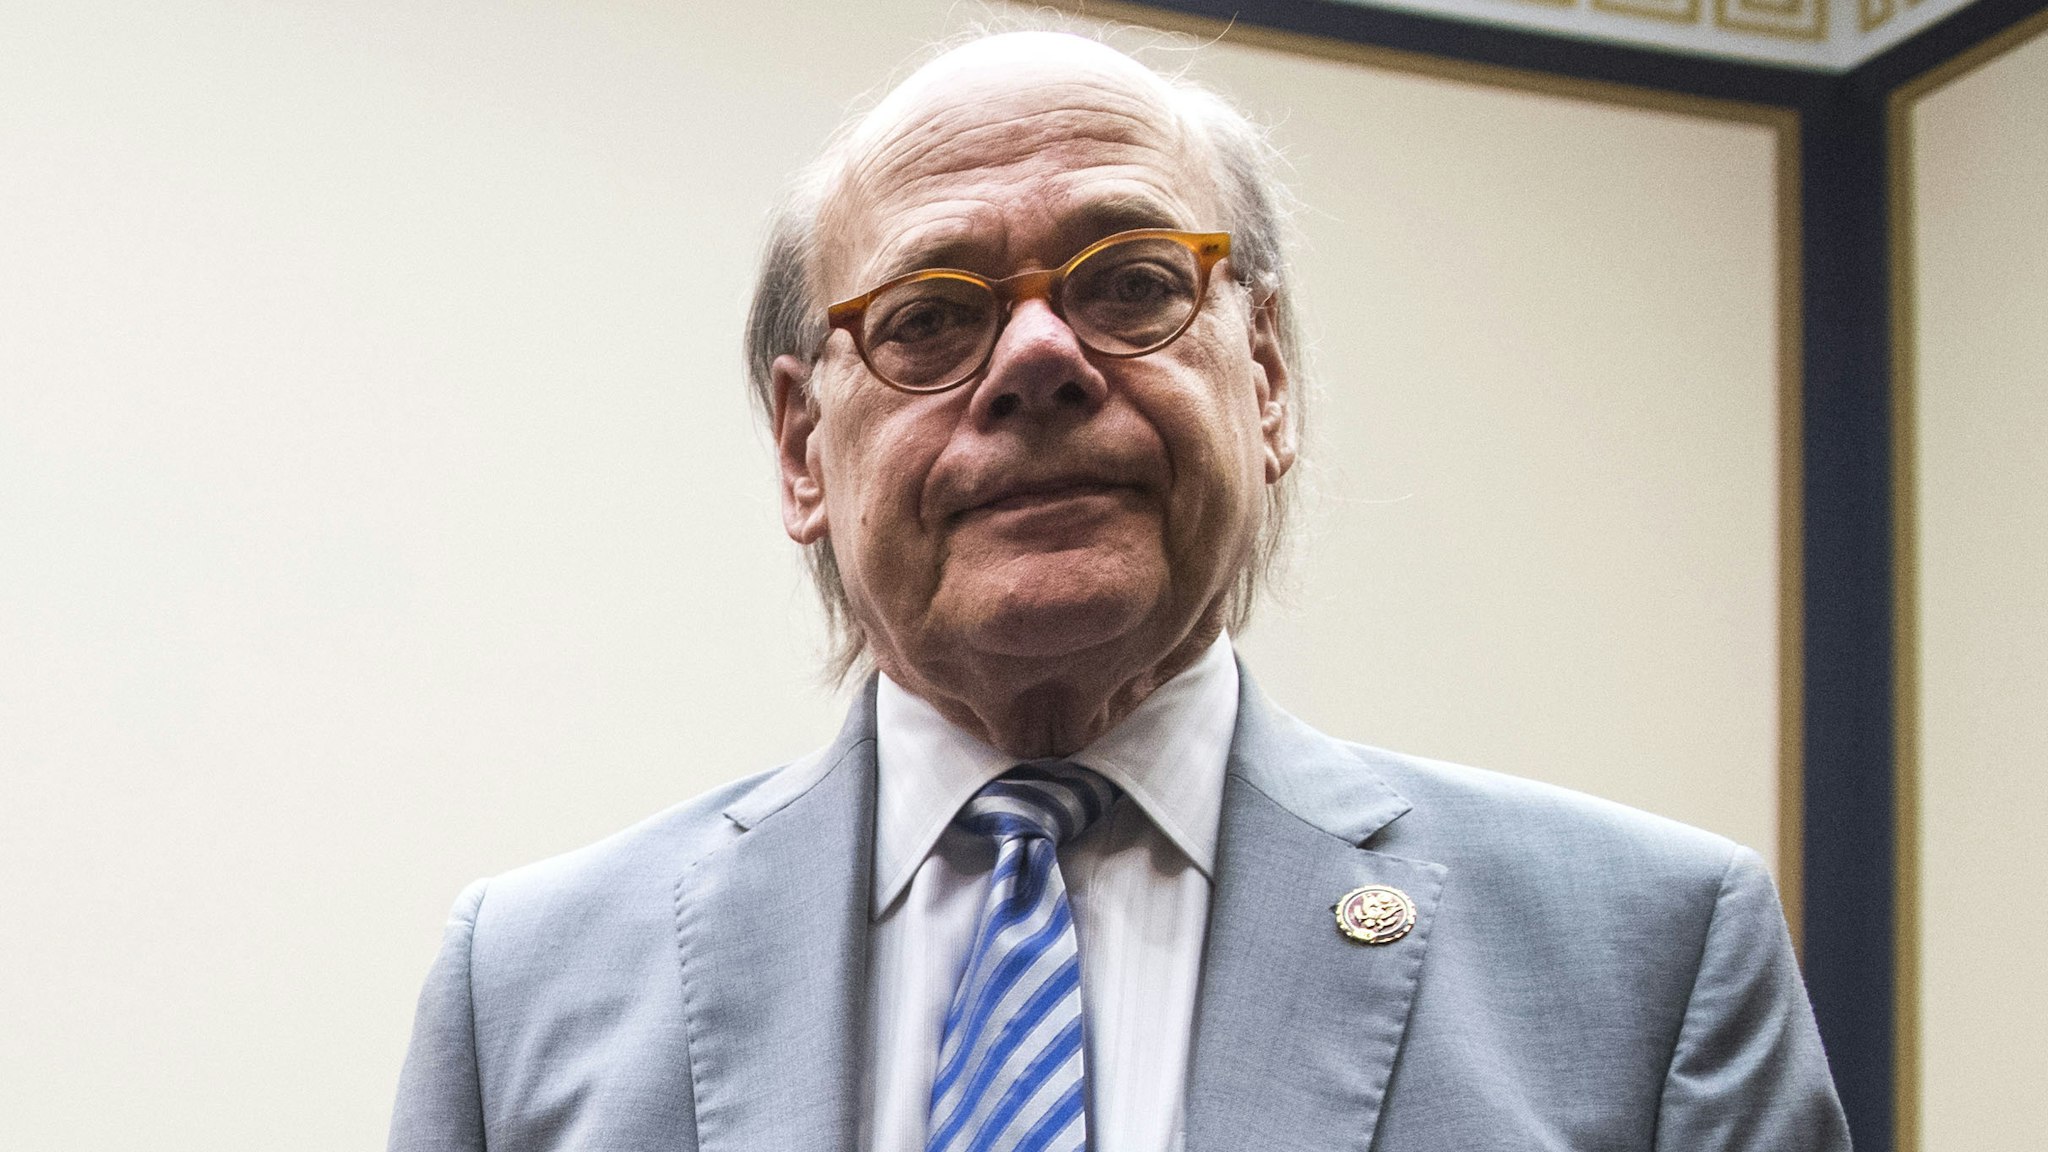 UNITED STATES - MAY 2: Rep. Steve Cohen, D-Tenn., brought a ceramic chicken to a House Judiciary Committee hearing in Rayburn Building in an effort to illustrate that Attorney General William Barr was scared to testify on Russian interference in the 2016 election and the Robert Mueller report on Thursday, May 2, 2019. Barr did not show up for the hearing citing displeasure with the format.